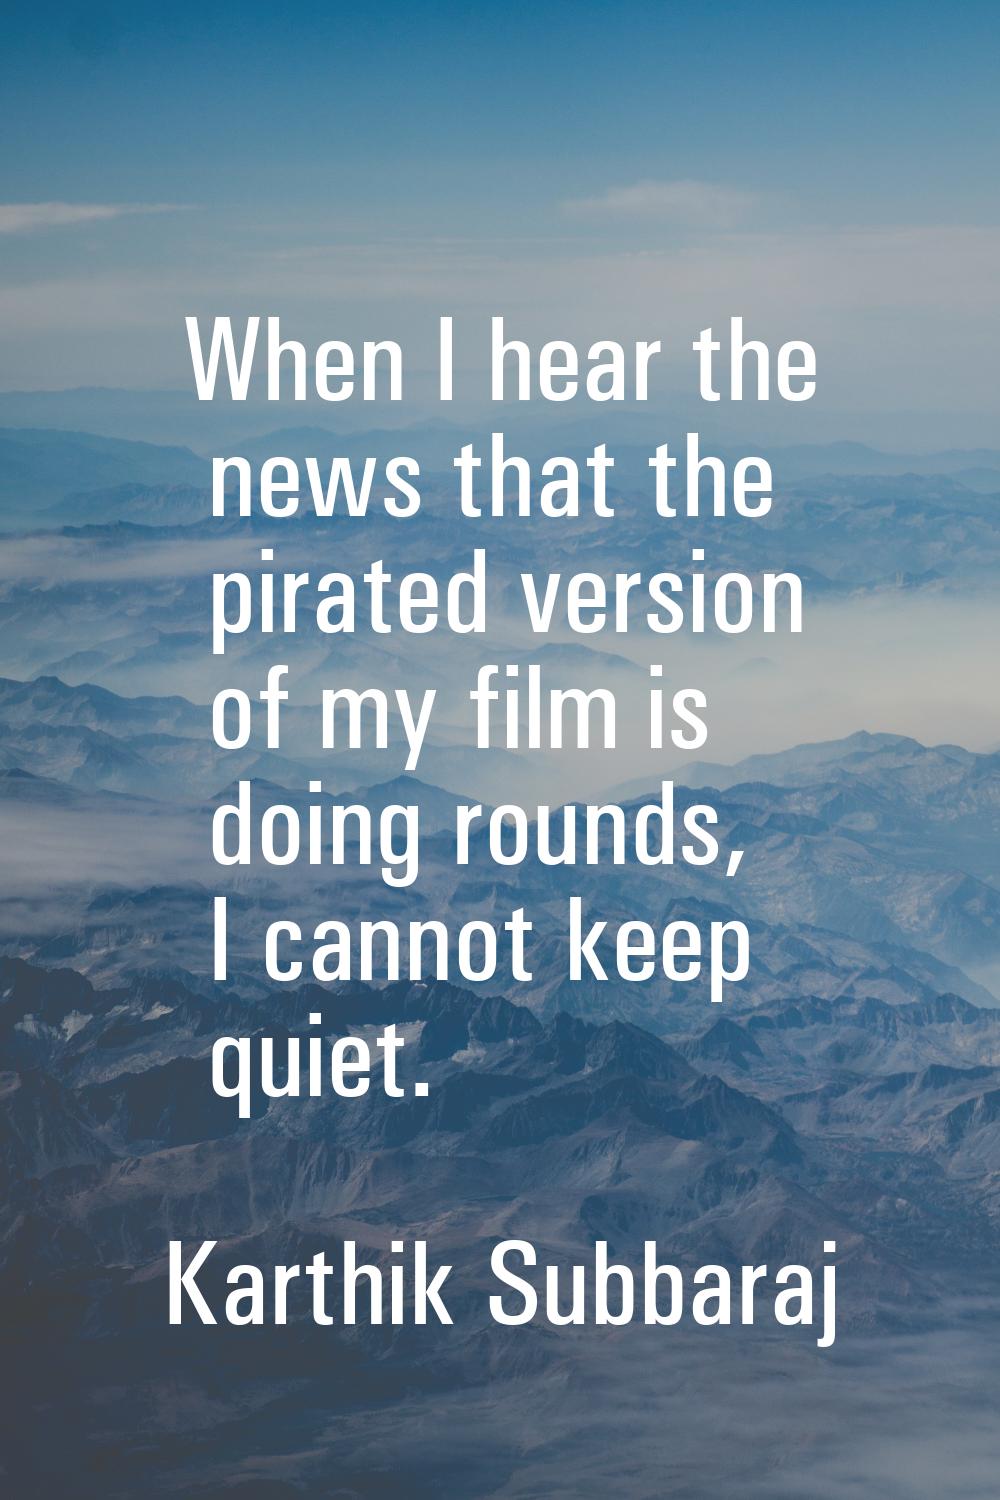 When I hear the news that the pirated version of my film is doing rounds, I cannot keep quiet.